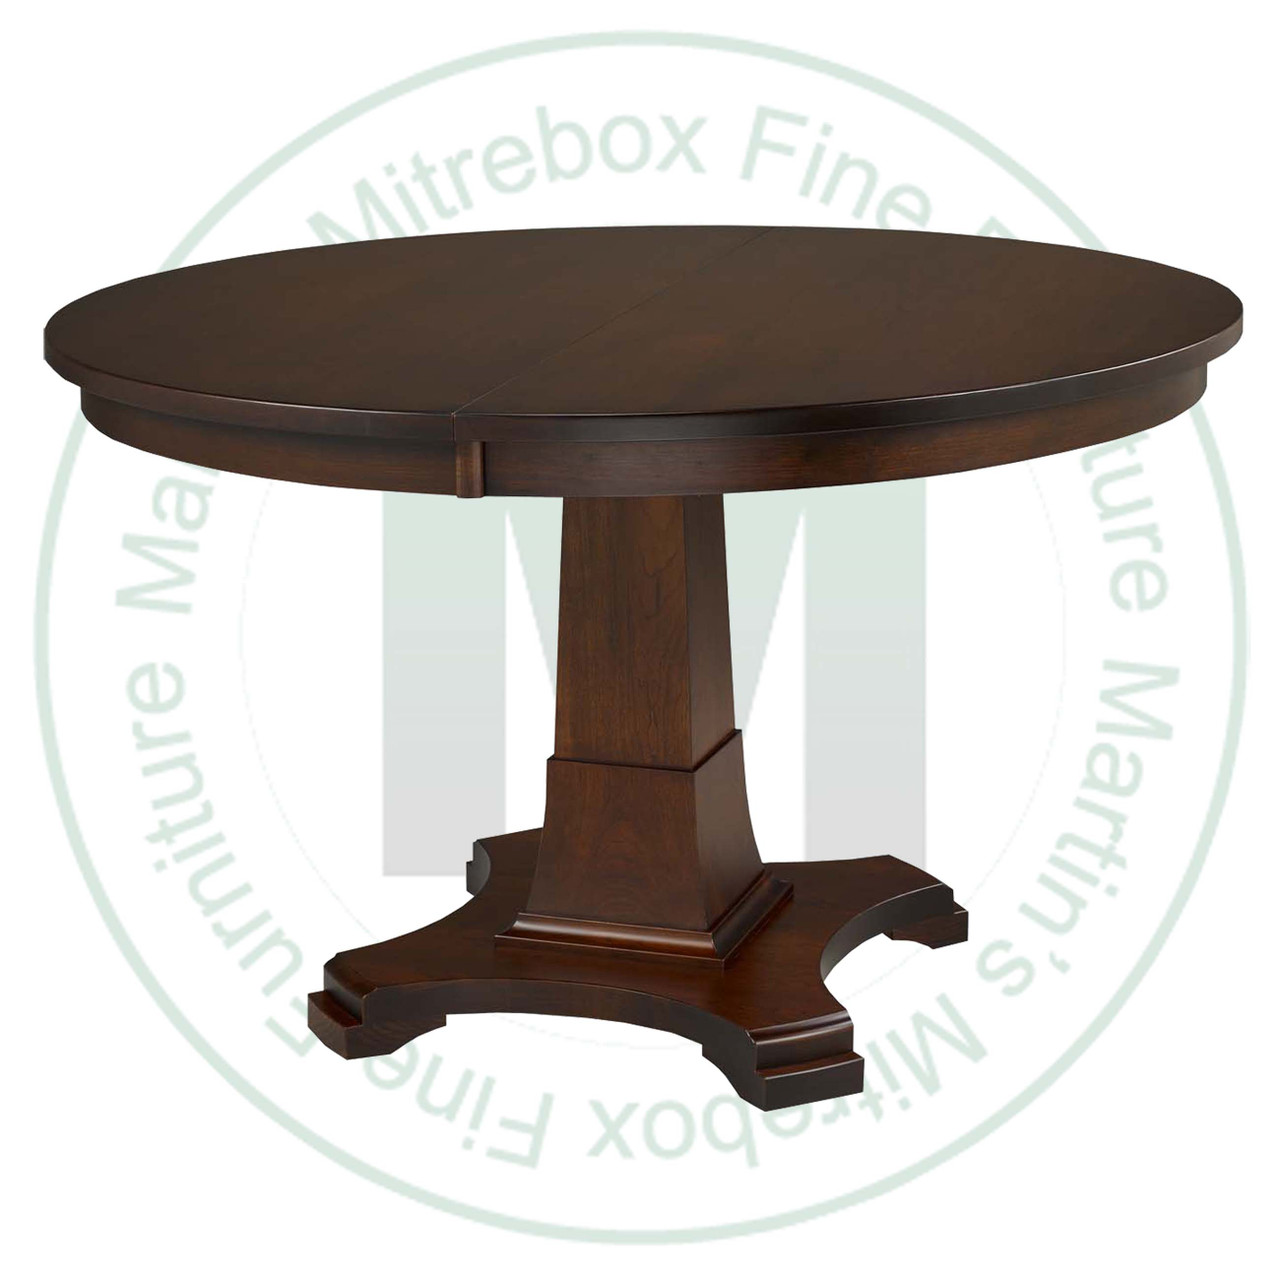 Oak Abbey Single Pedestal Table 36''D x 42''W x 30''H With 1 - 12'' Leaf. Table Has 1'' Thick Top